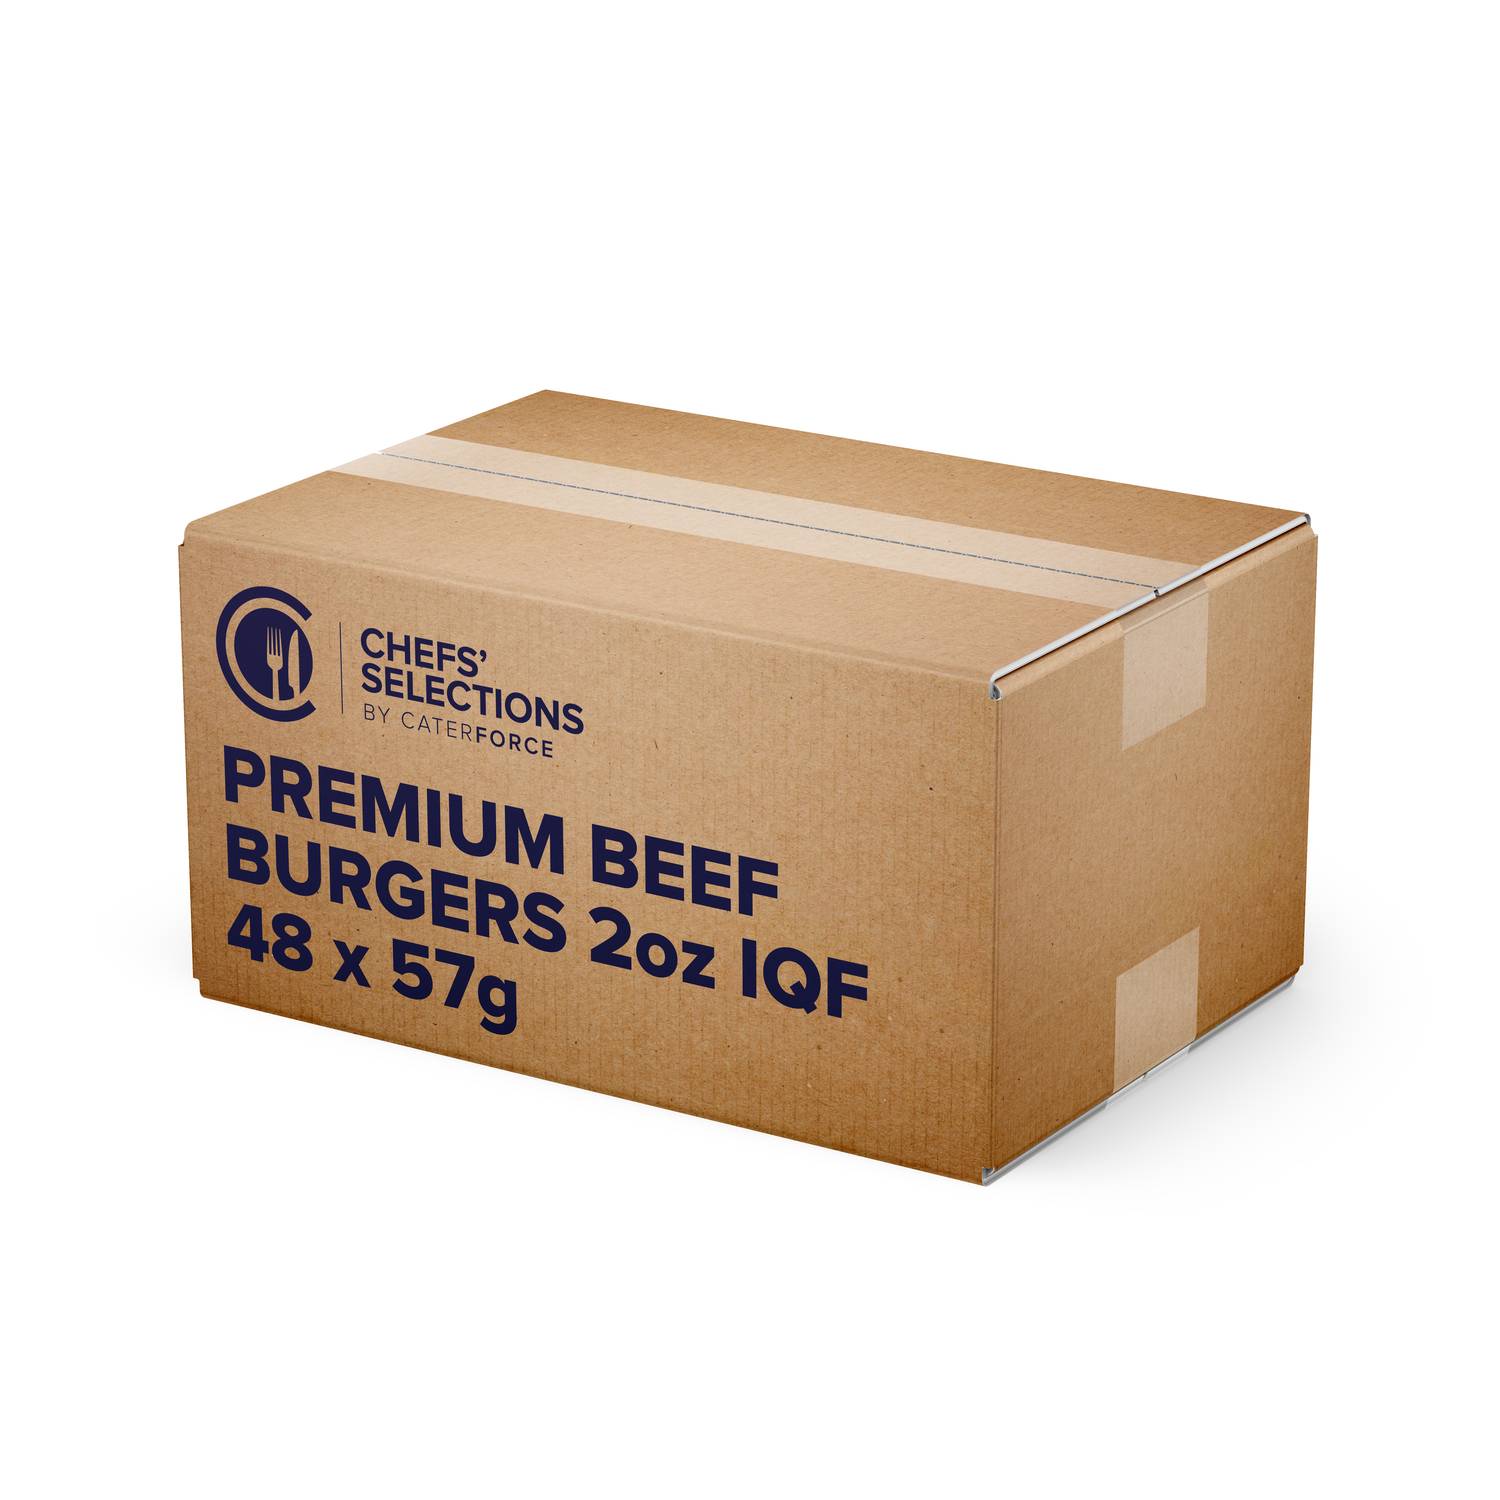 Chefs’ Selections Premium Beef Burger 2oz IQF (48 x 57g)